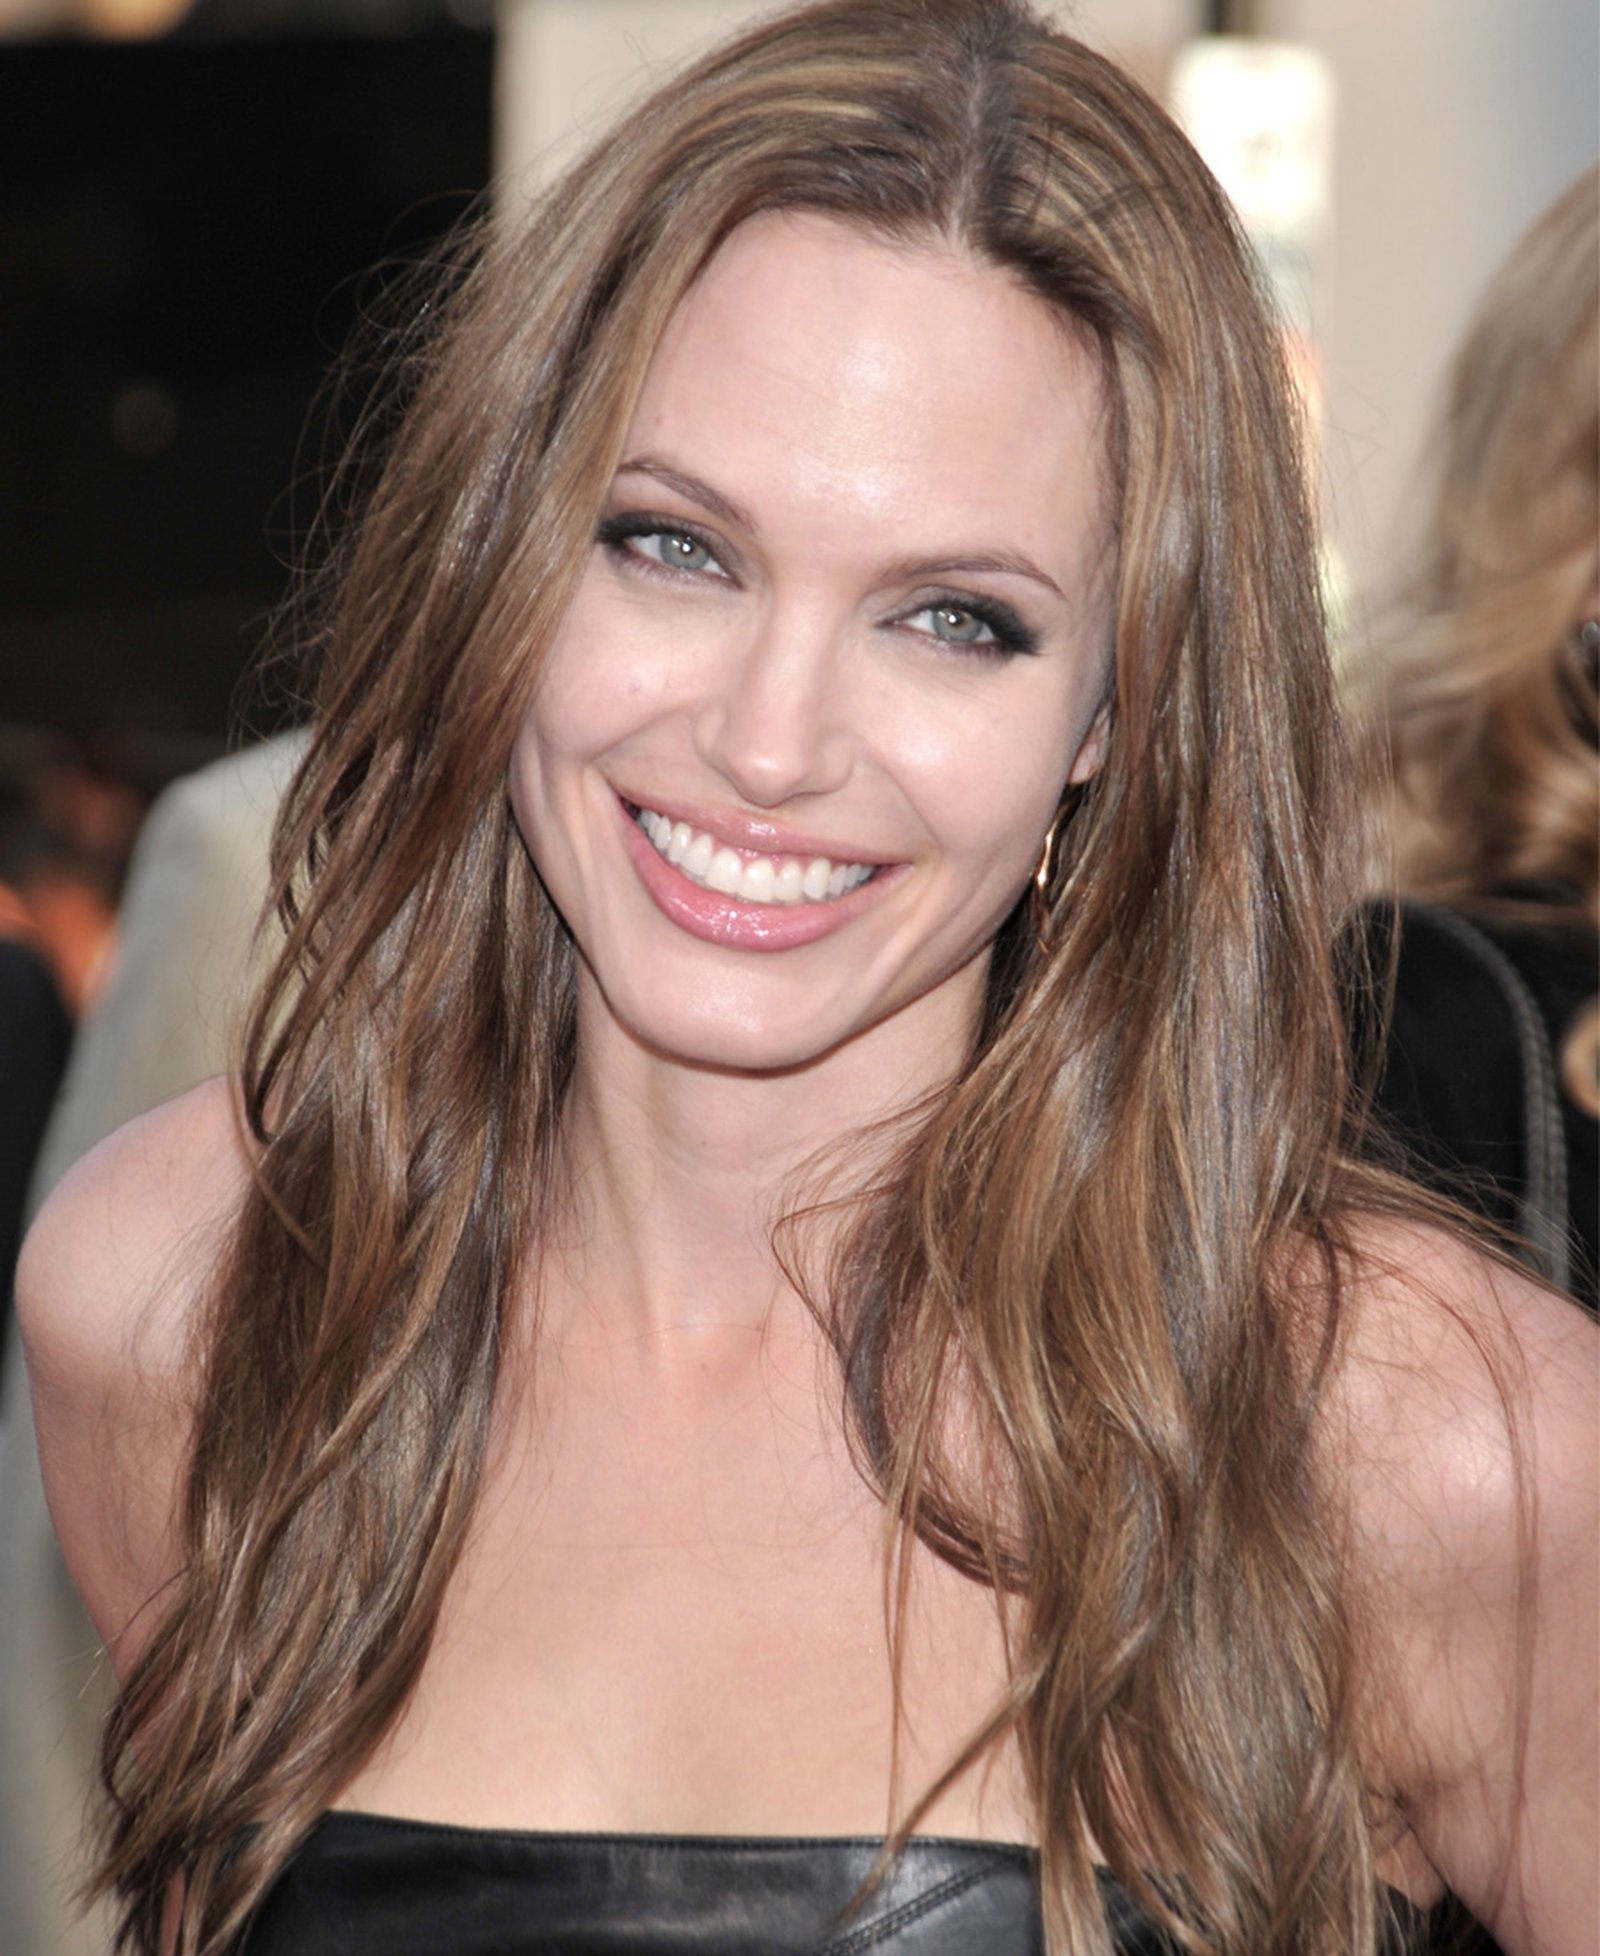 Angelina Jolie was named the face of Louis Vuitton's Core Values